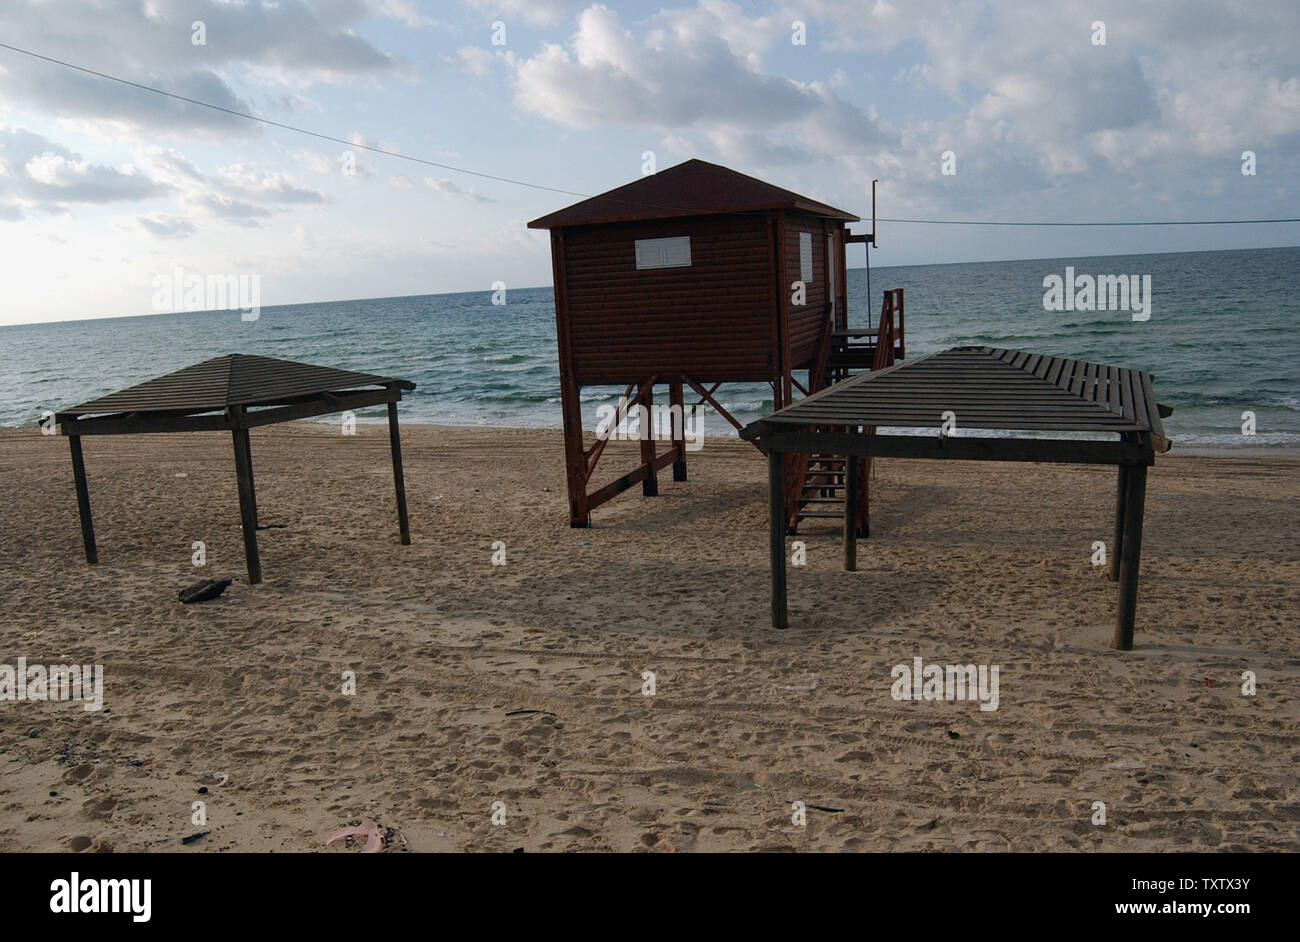 The beach in front of the Palm Beach Hotel in Gush Katif has been empty for over three years with the start of the Palestinian Intifada, , November 20, 2003. The Gaza resort use to be a favorite location for vacationers. (UPI Photo/Debbie Hill) Stock Photo